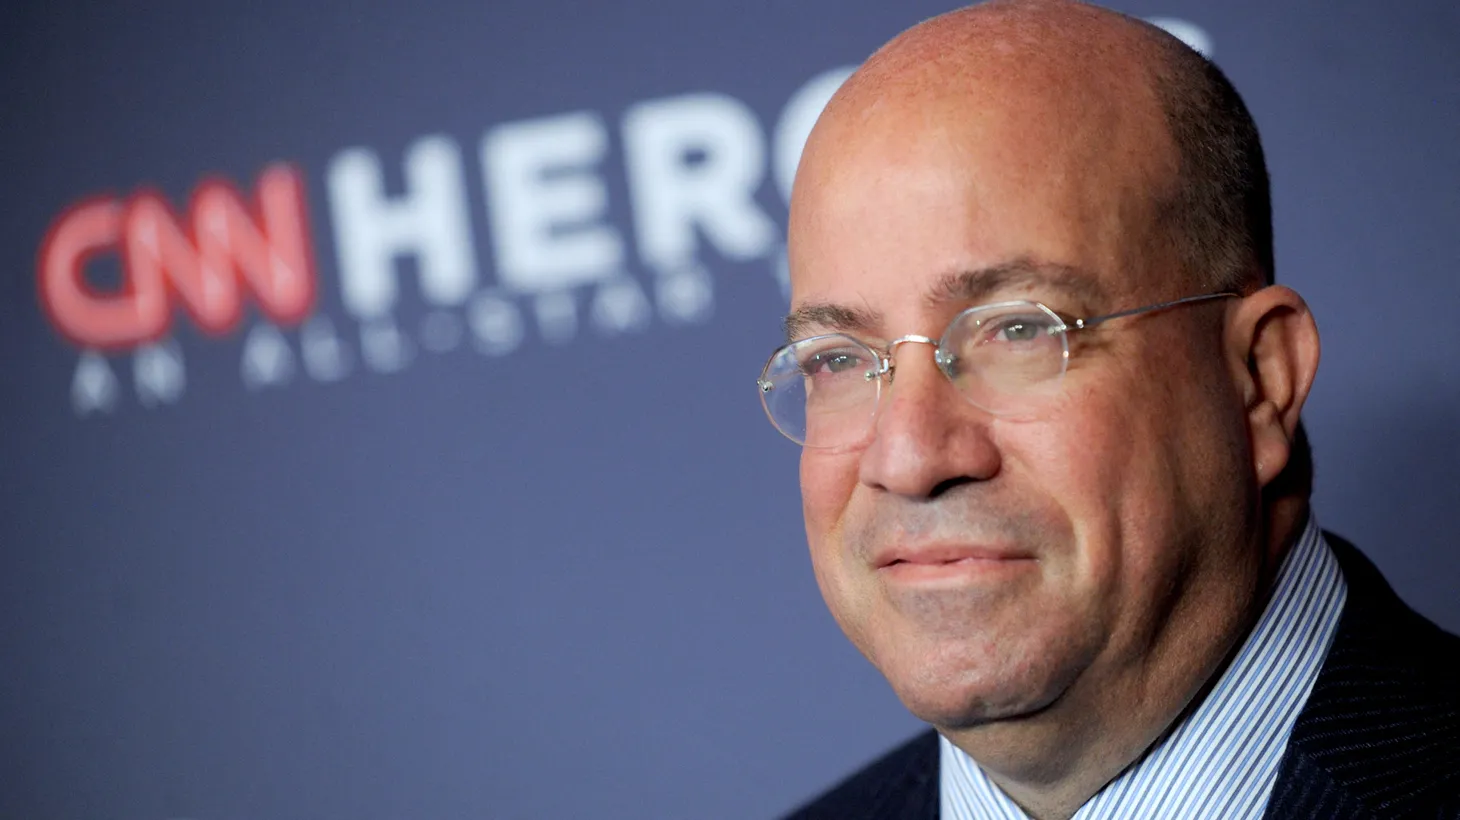 Jeff Zucker arrived for “CNN Heroes: An All-Star Tribute” at the American Museum of Natural History in New York City, December 17, 2017. This week, Zucker resigned as the head of CNN after failing to disclose a romantic relationship with a senior executive.